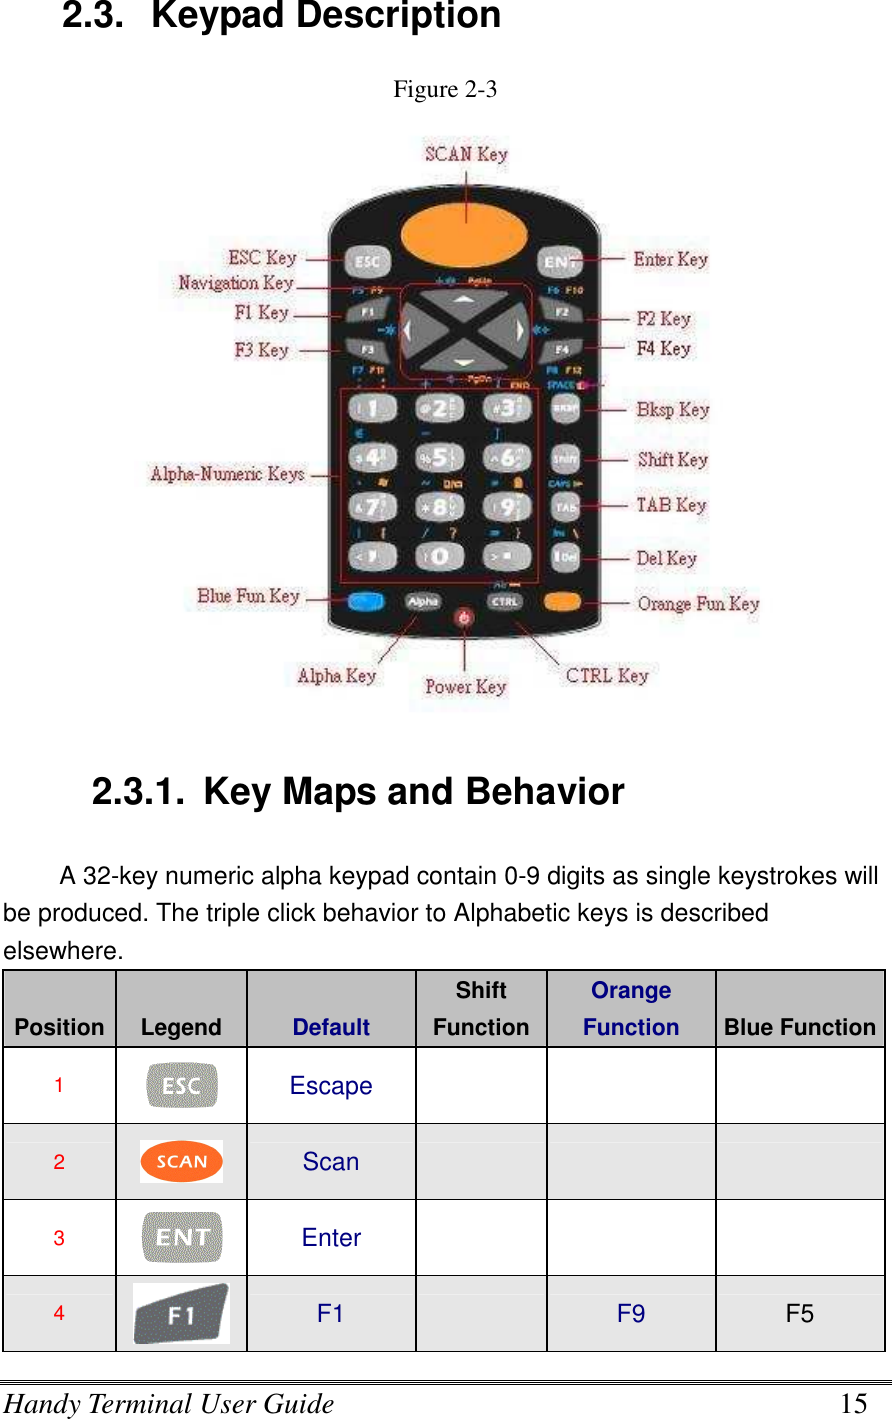 Handy Terminal User Guide      15  2.3.  Keypad Description   Figure 2-3                        2.3.1.  Key Maps and Behavior A 32-key numeric alpha keypad contain 0-9 digits as single keystrokes will be produced. The triple click behavior to Alphabetic keys is described elsewhere. Position Legend  Default Shift Function Orange Function  Blue Function 1   Escape     2   Scan     3   Enter     4  F1   F9  F5 